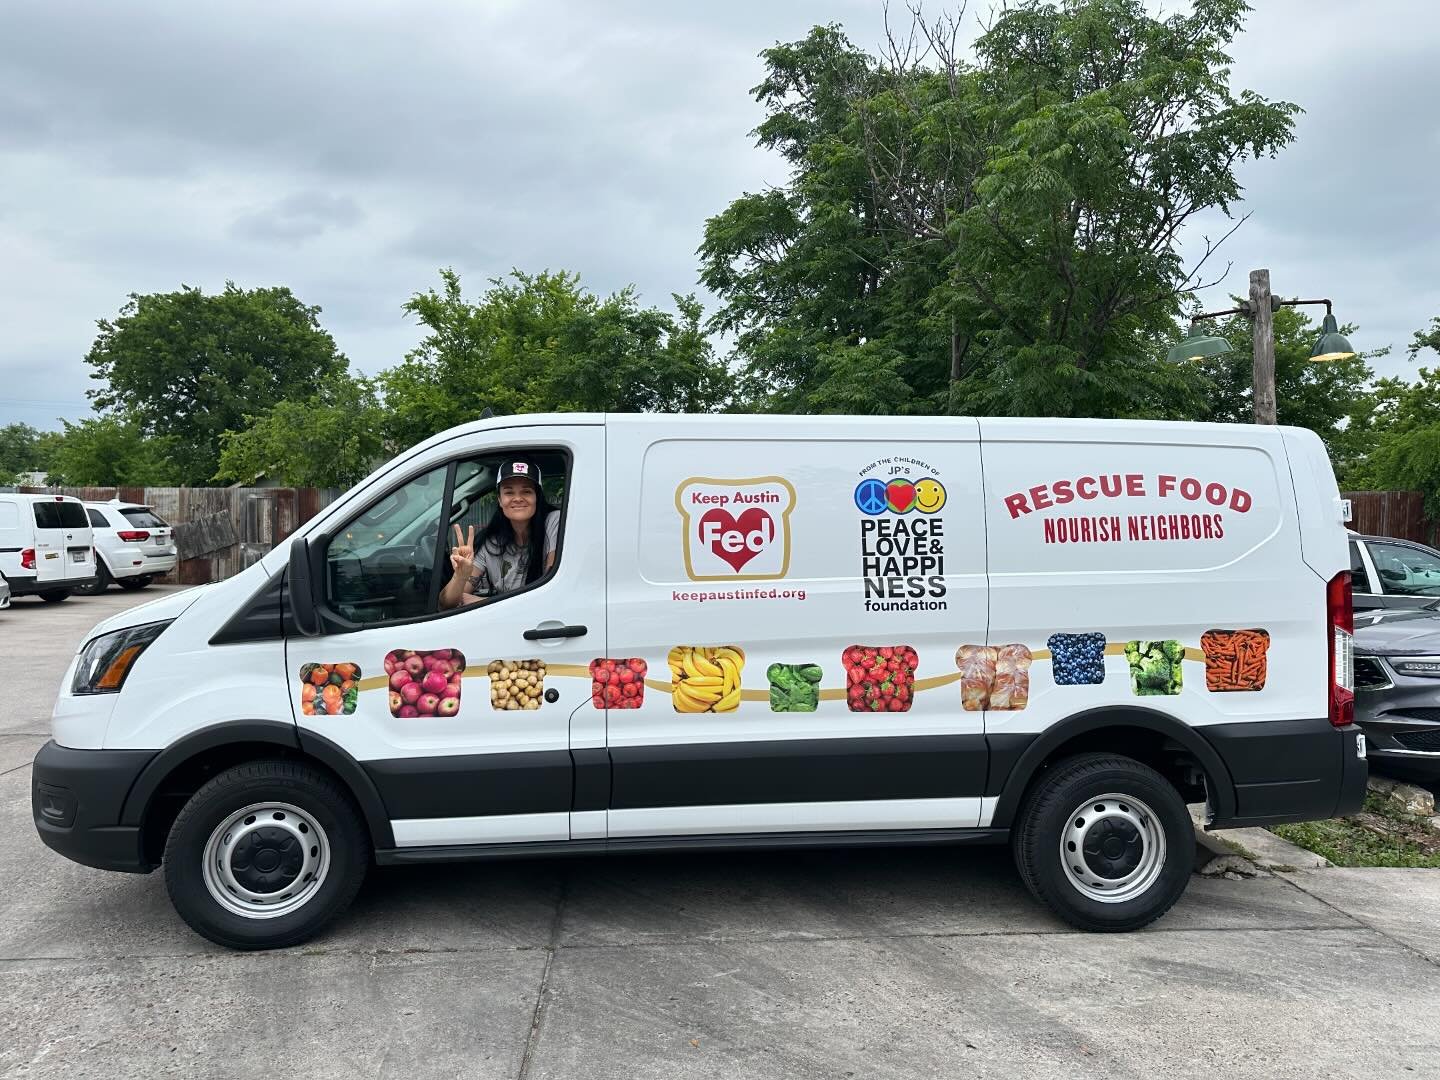 Beep beep 🥬🥦🌽🥕! @keepaustinfed reduces hunger &amp; helps the environment by connecting surplus food with our neighbors in need. They do this by utilizing a network of volunteers, cold storage, and relationships with grocery stores, caterers and 